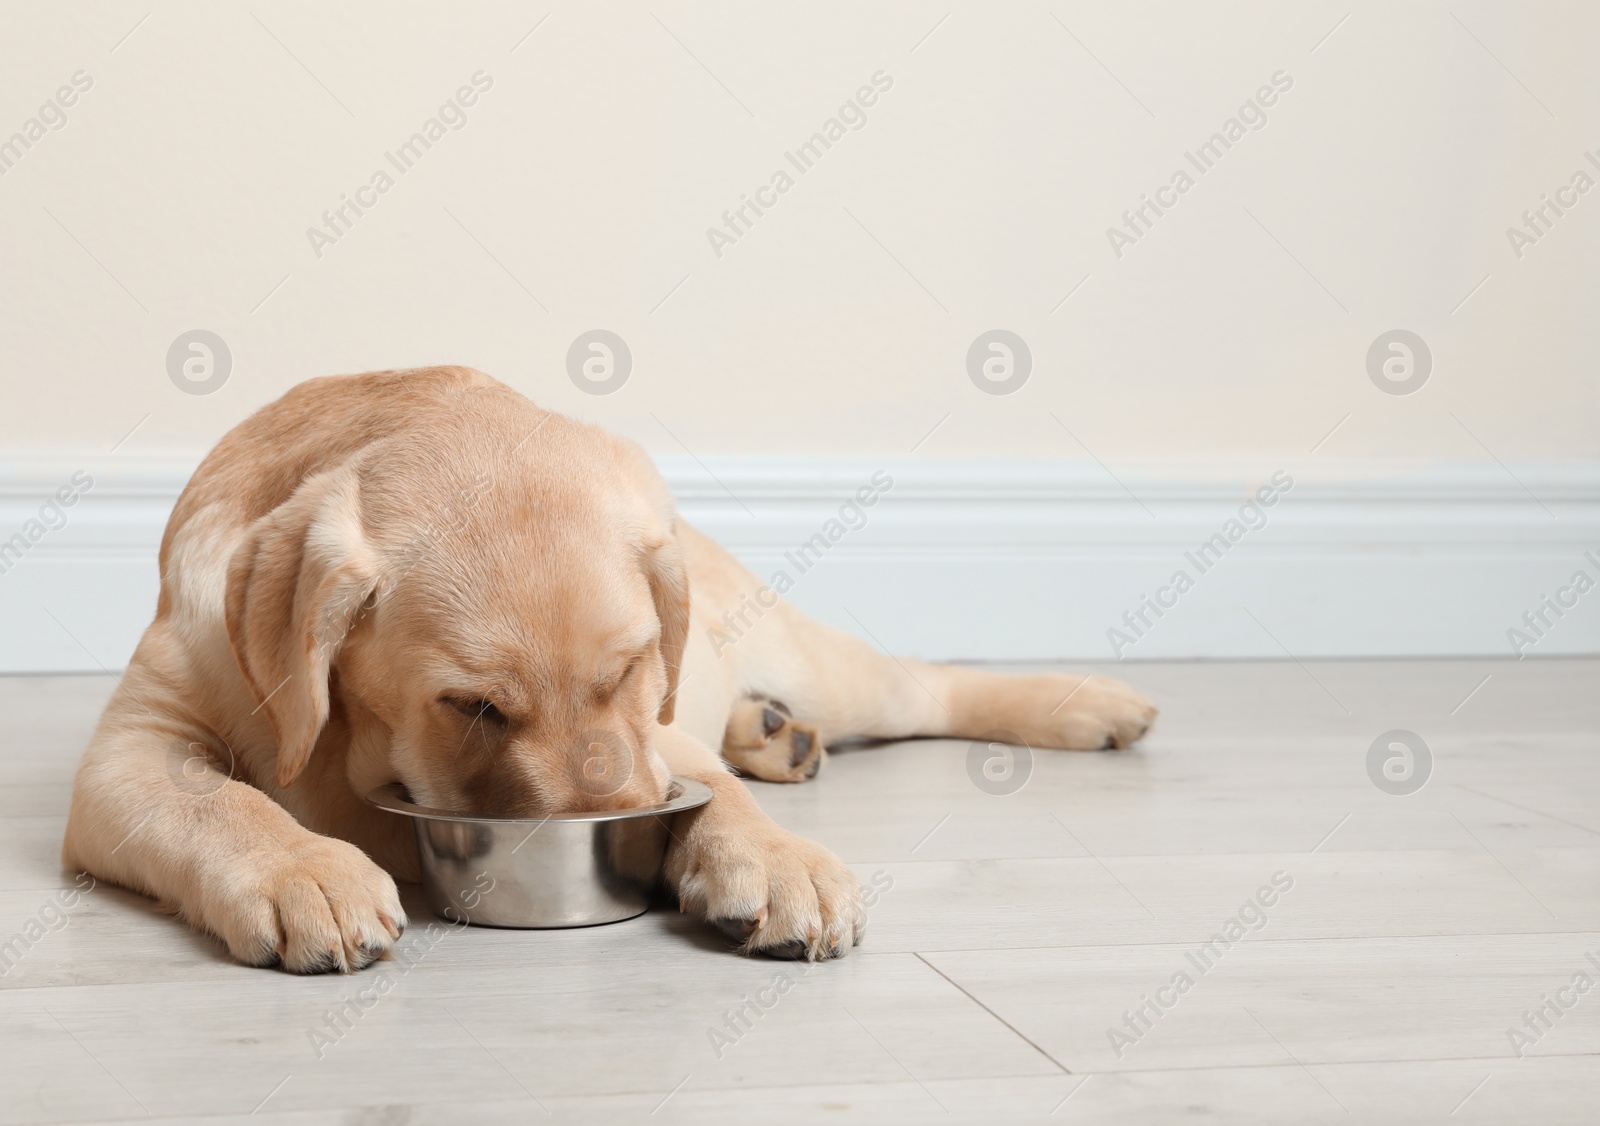 Photo of Cute yellow labrador retriever puppy eating from bowl on floor indoors. Space for text